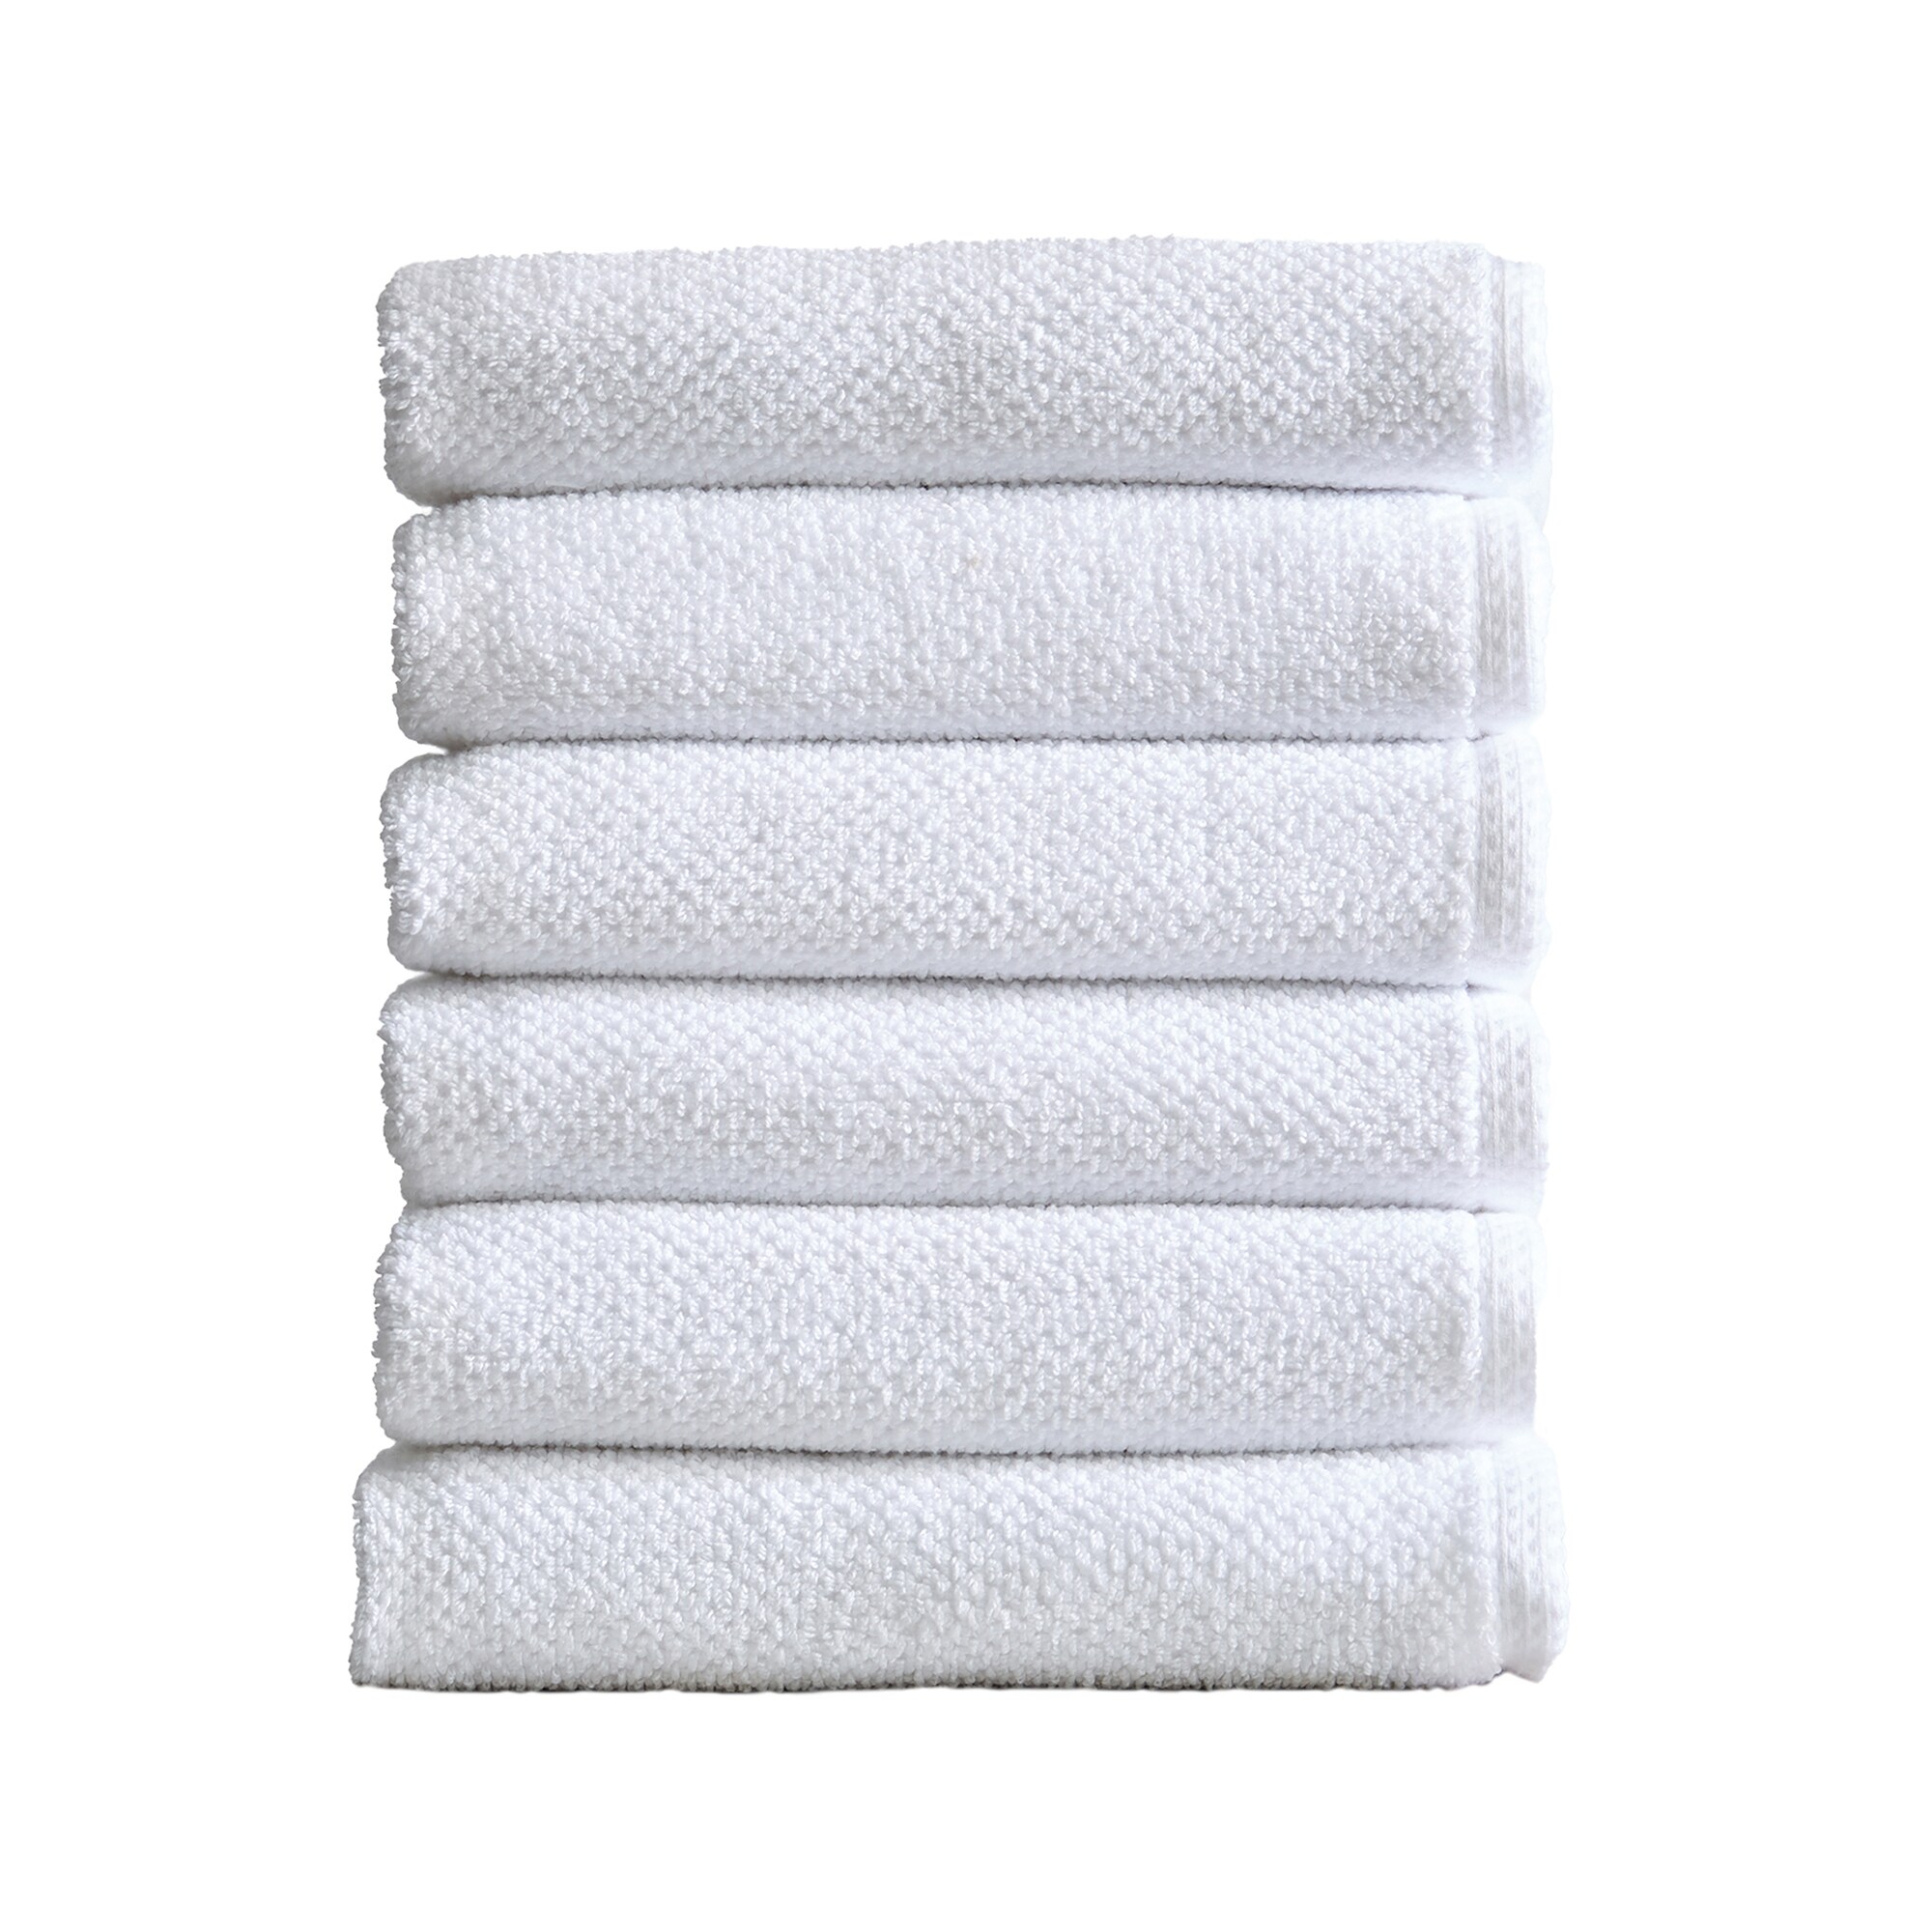 https://ak1.ostkcdn.com/images/products/is/images/direct/86ea72bf66b1d50c579bcc41ecc3bc746ff676d8/Great-Bay-Home-Ultra-Absorbent-Cotton-Popcorn-Towel-Set-Acacia-Collection.jpg